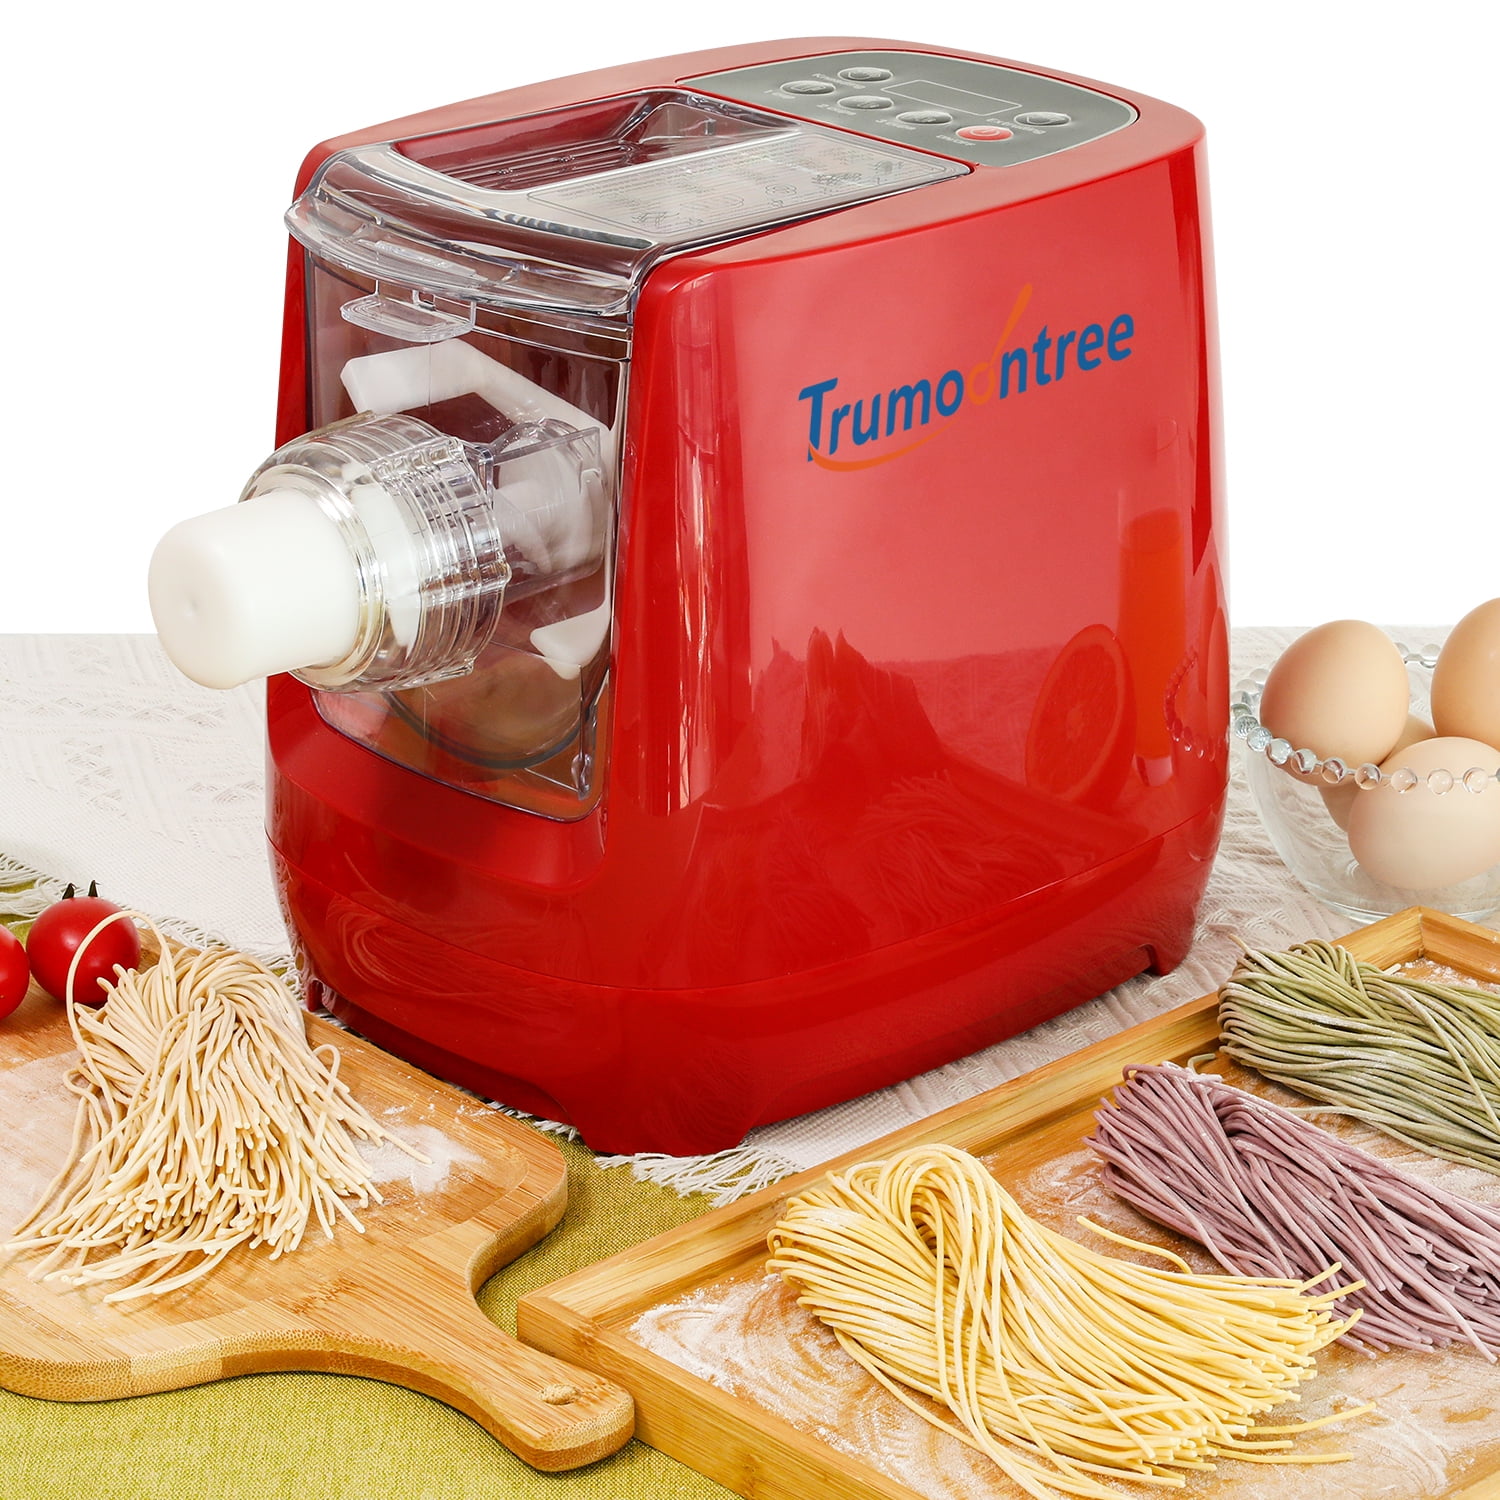 Miumaeov Electric Pasta Maker,Electric Pasta and Ramen Noodle Maker Machine,  Automatic Noodle Maker Machine with 9 Molds to Choose, Make Spaghetti,  Fettuccine, Penne, Macaroni, or Dumpling Wrappers 